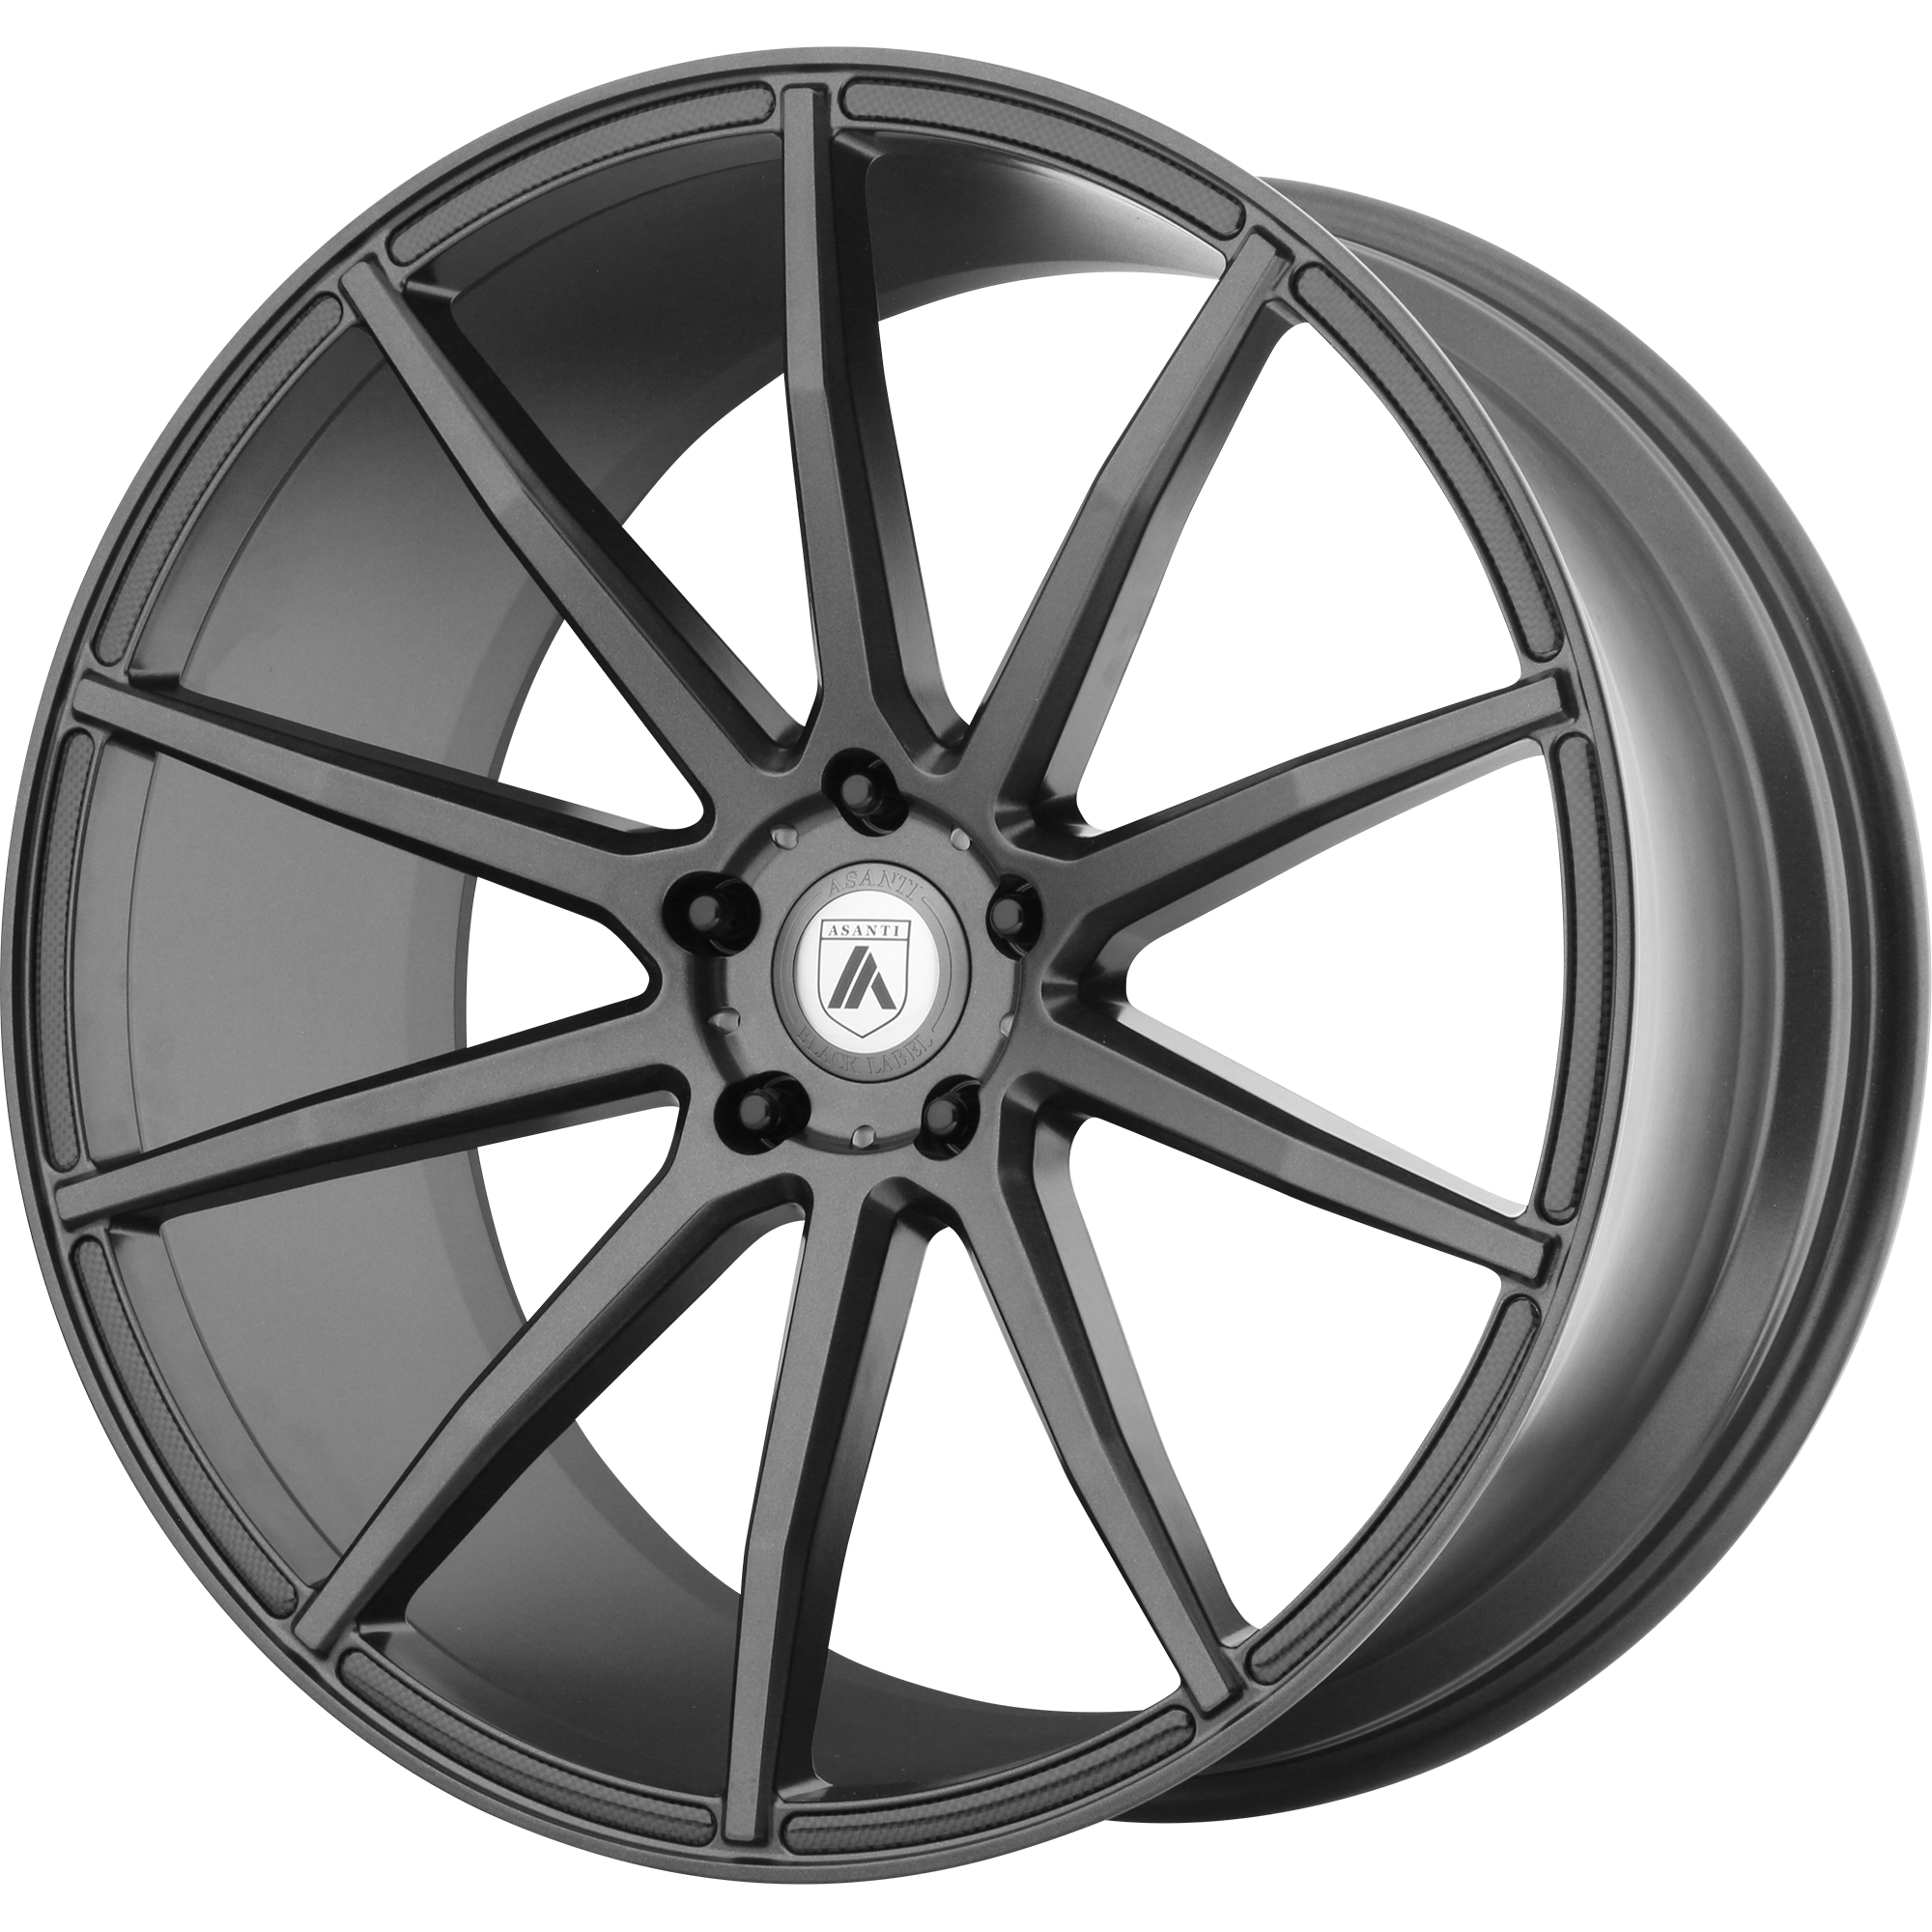 ARIES 22x10.5 5x115.00 MATTE GRAPHITE (25 mm) - Tires and Engine Performance